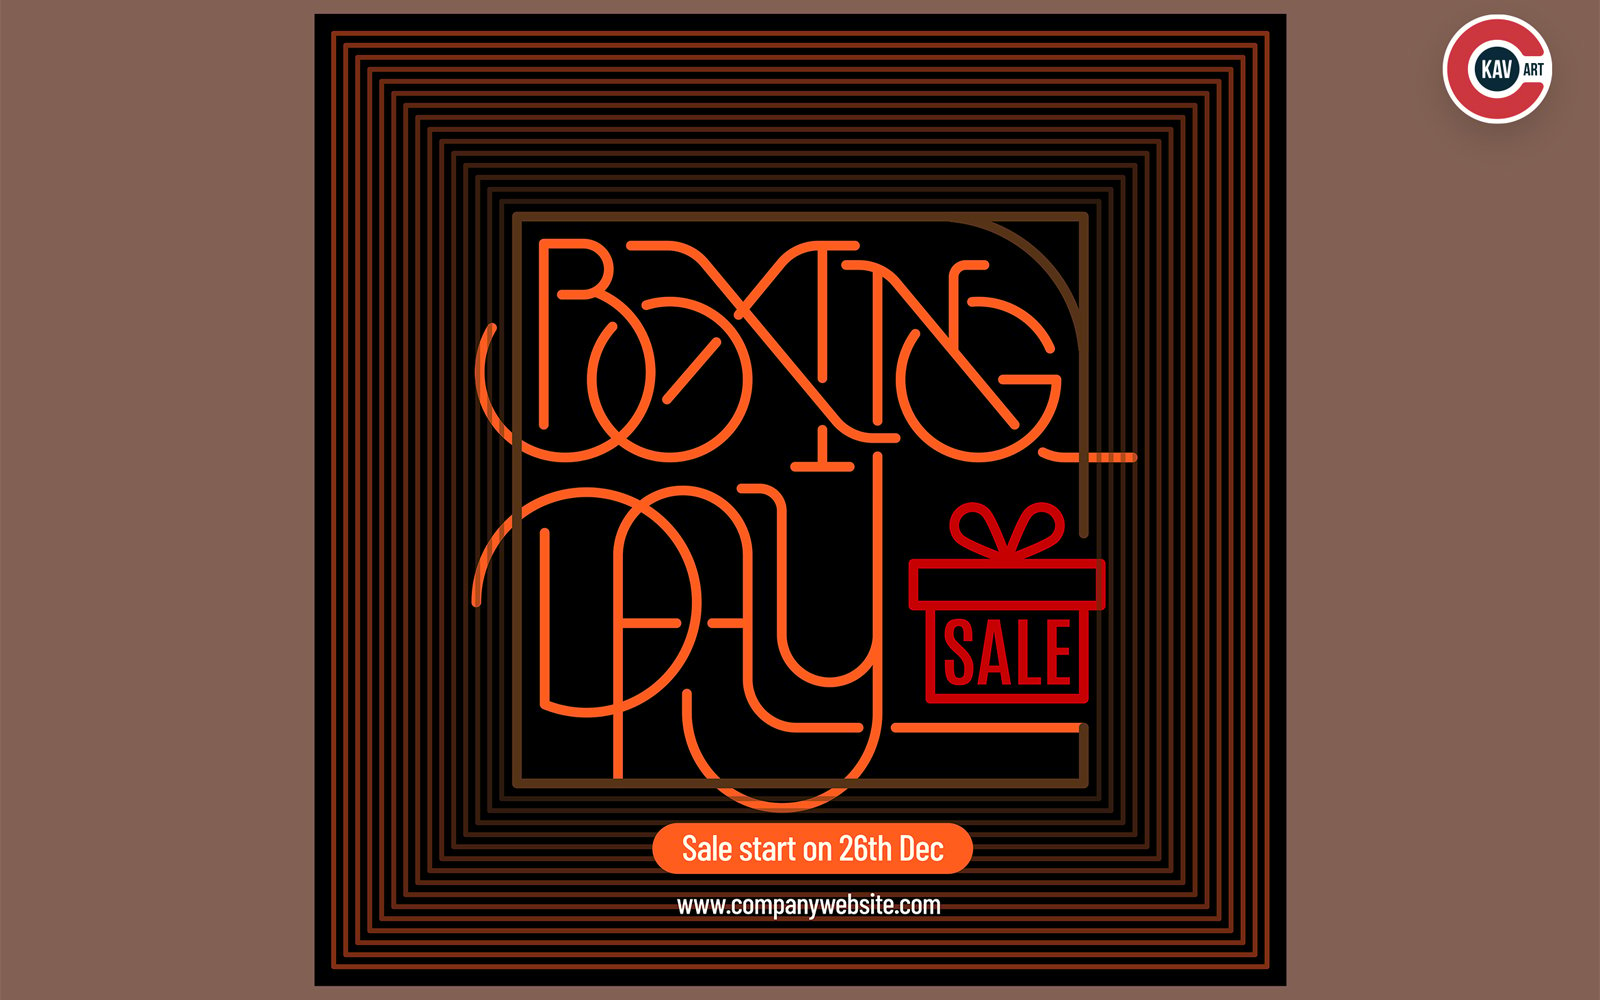 Boxing day sale banner for social media post design template - 00008